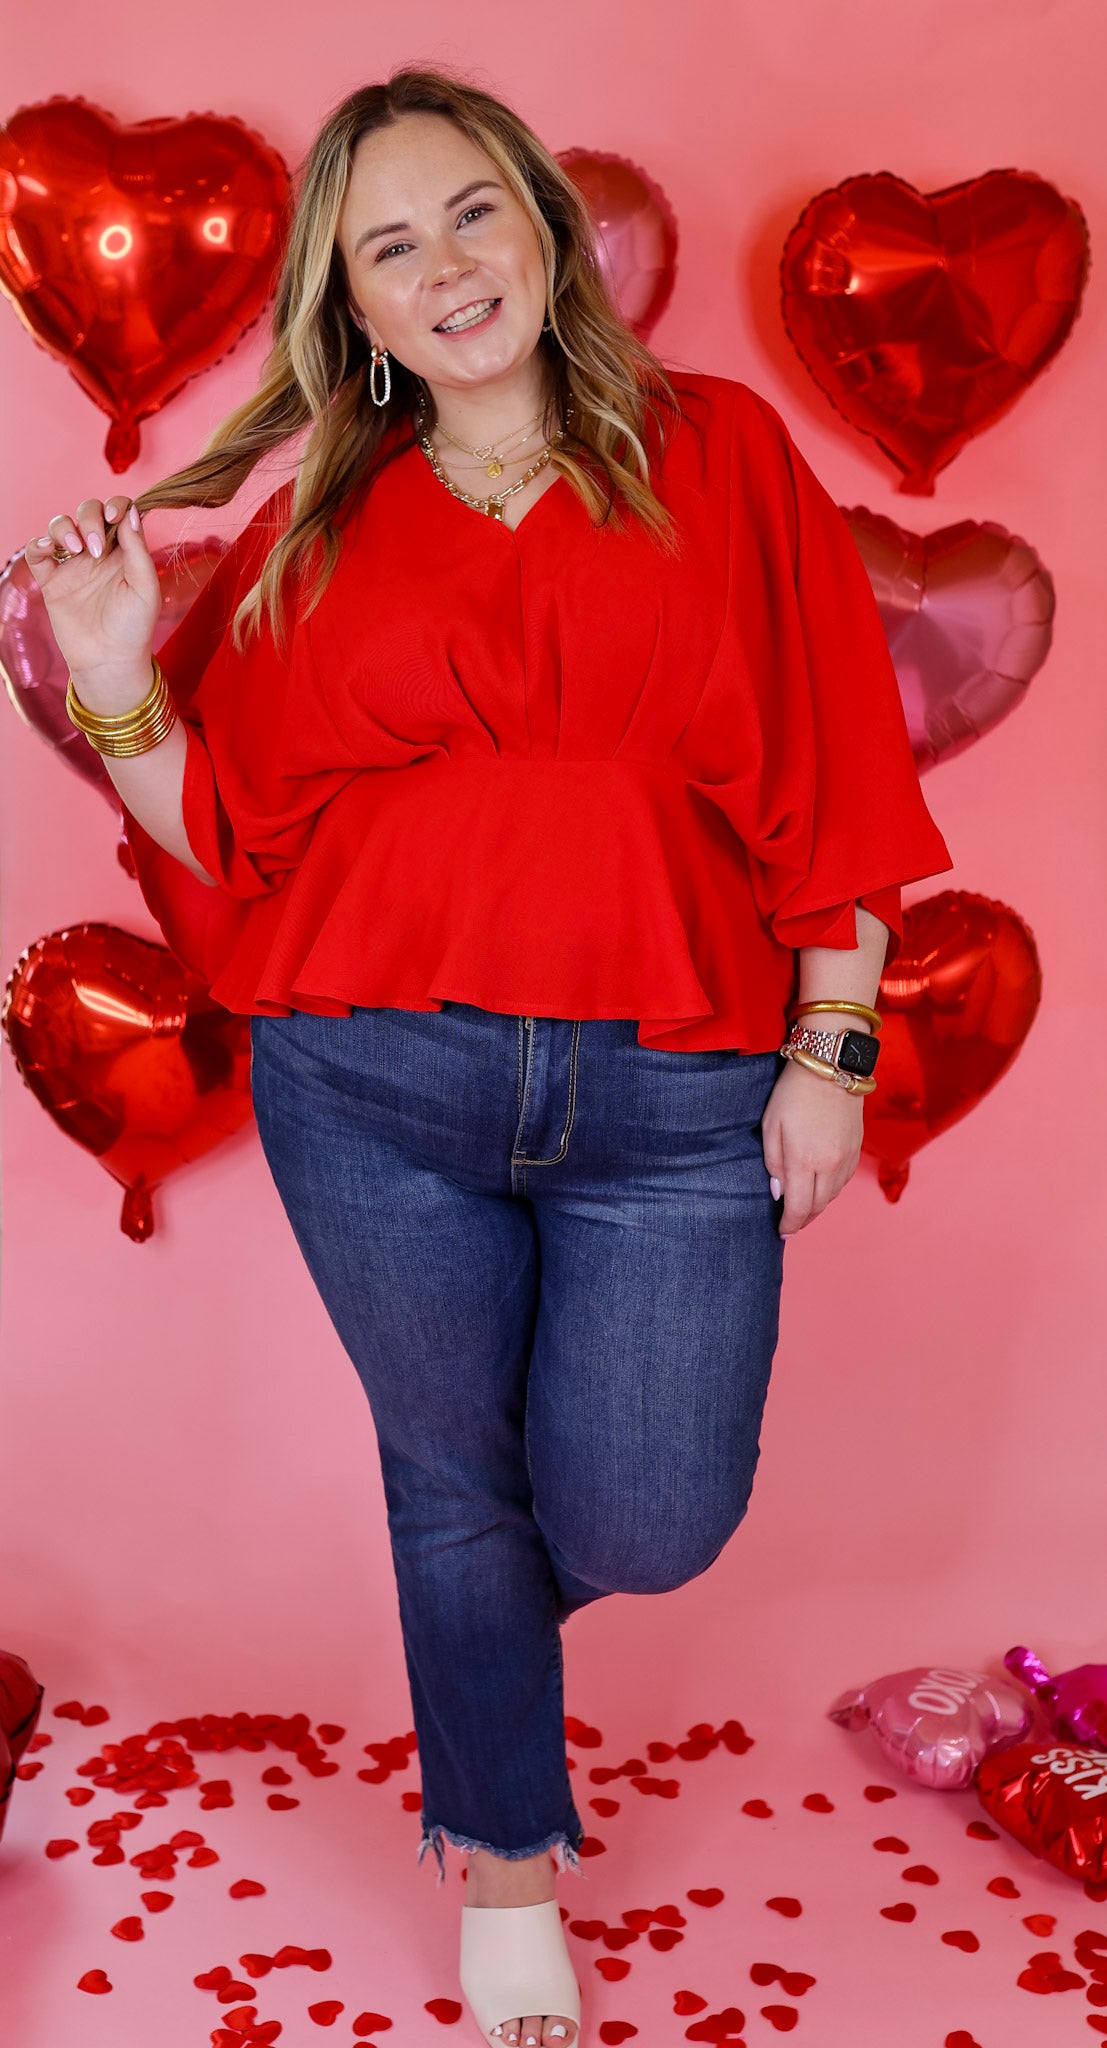 Hear the Music Drop Sleeve V Neck Peplum Top in Red - Giddy Up Glamour Boutique